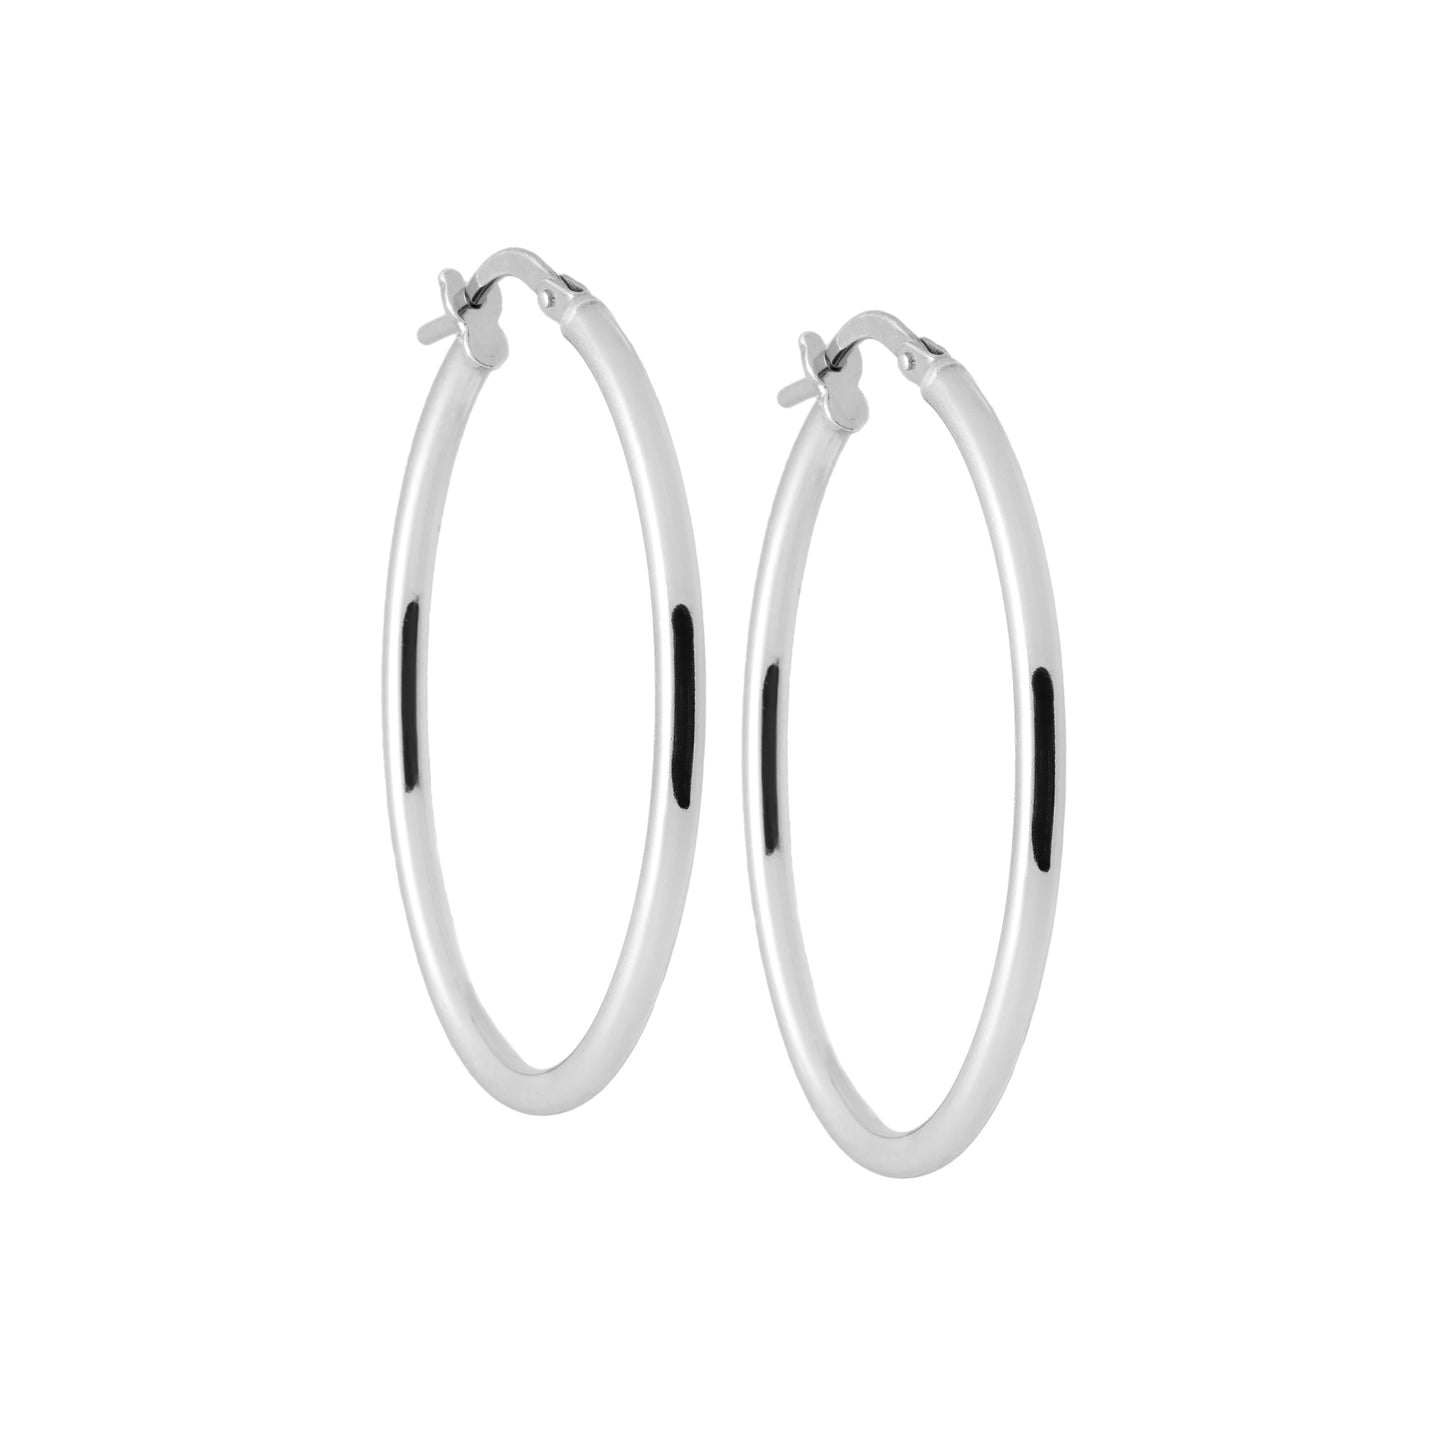 CONFIDENCE OVAL HOOPS 30mm